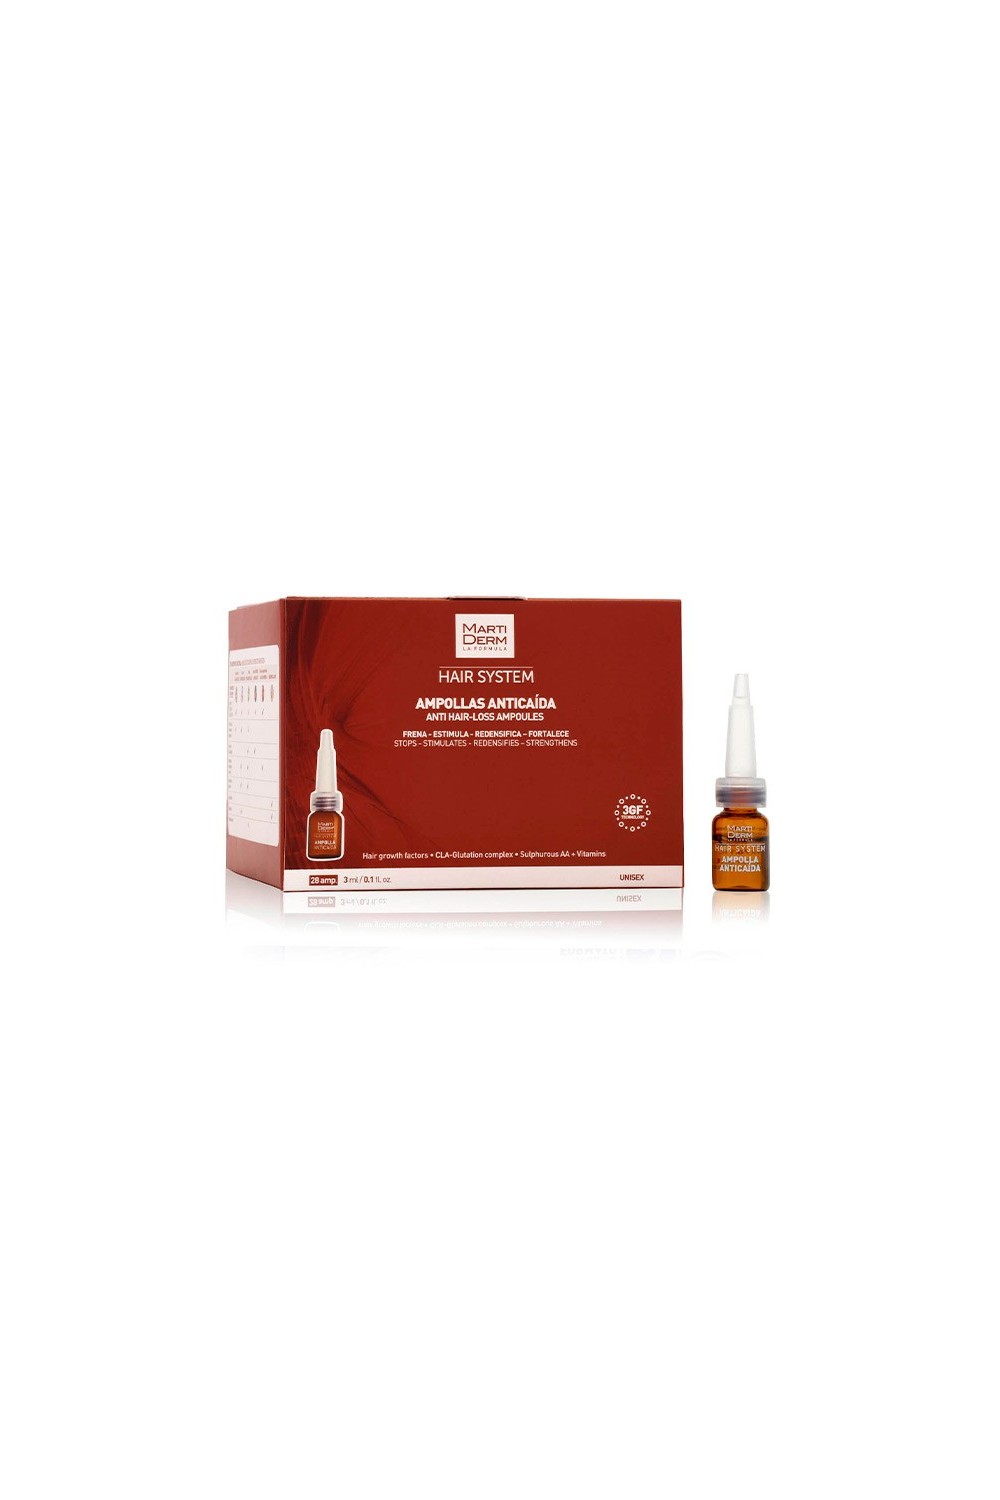 Martiderm Hair System Anti-Hair Lose 28 Ampoules